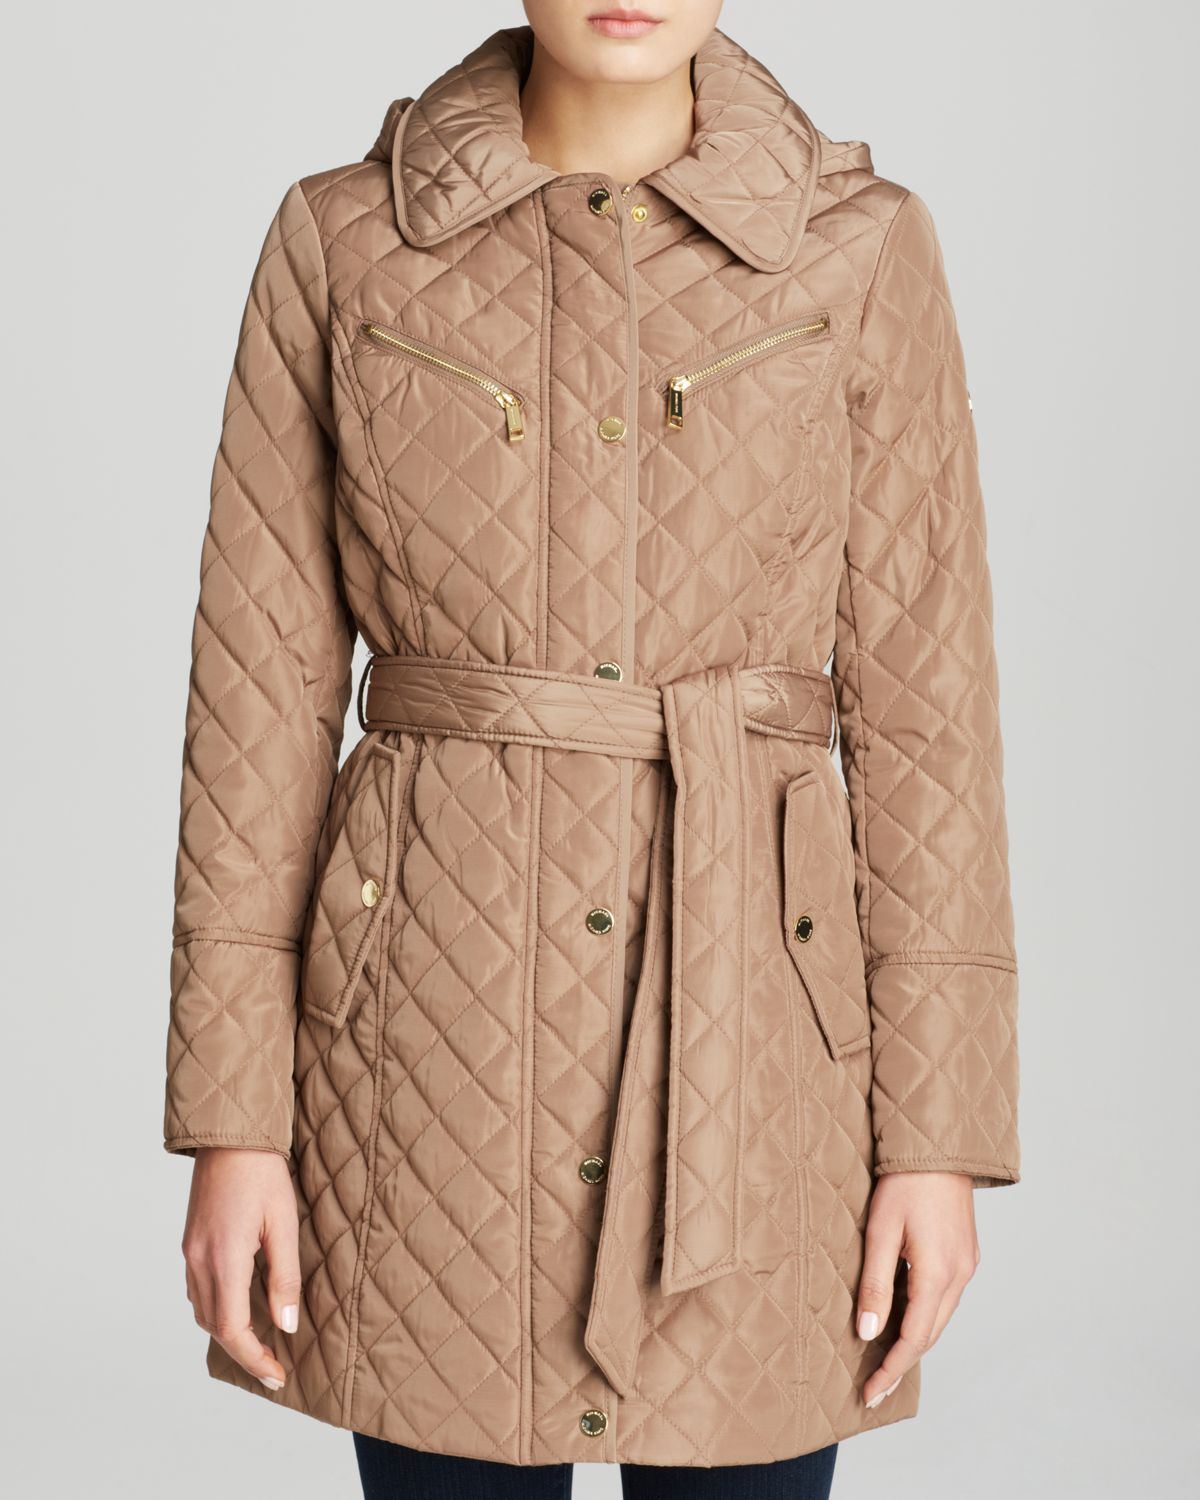 MICHAEL Michael Kors Coat - Missy Quilted Belted Trench in Brown | Lyst